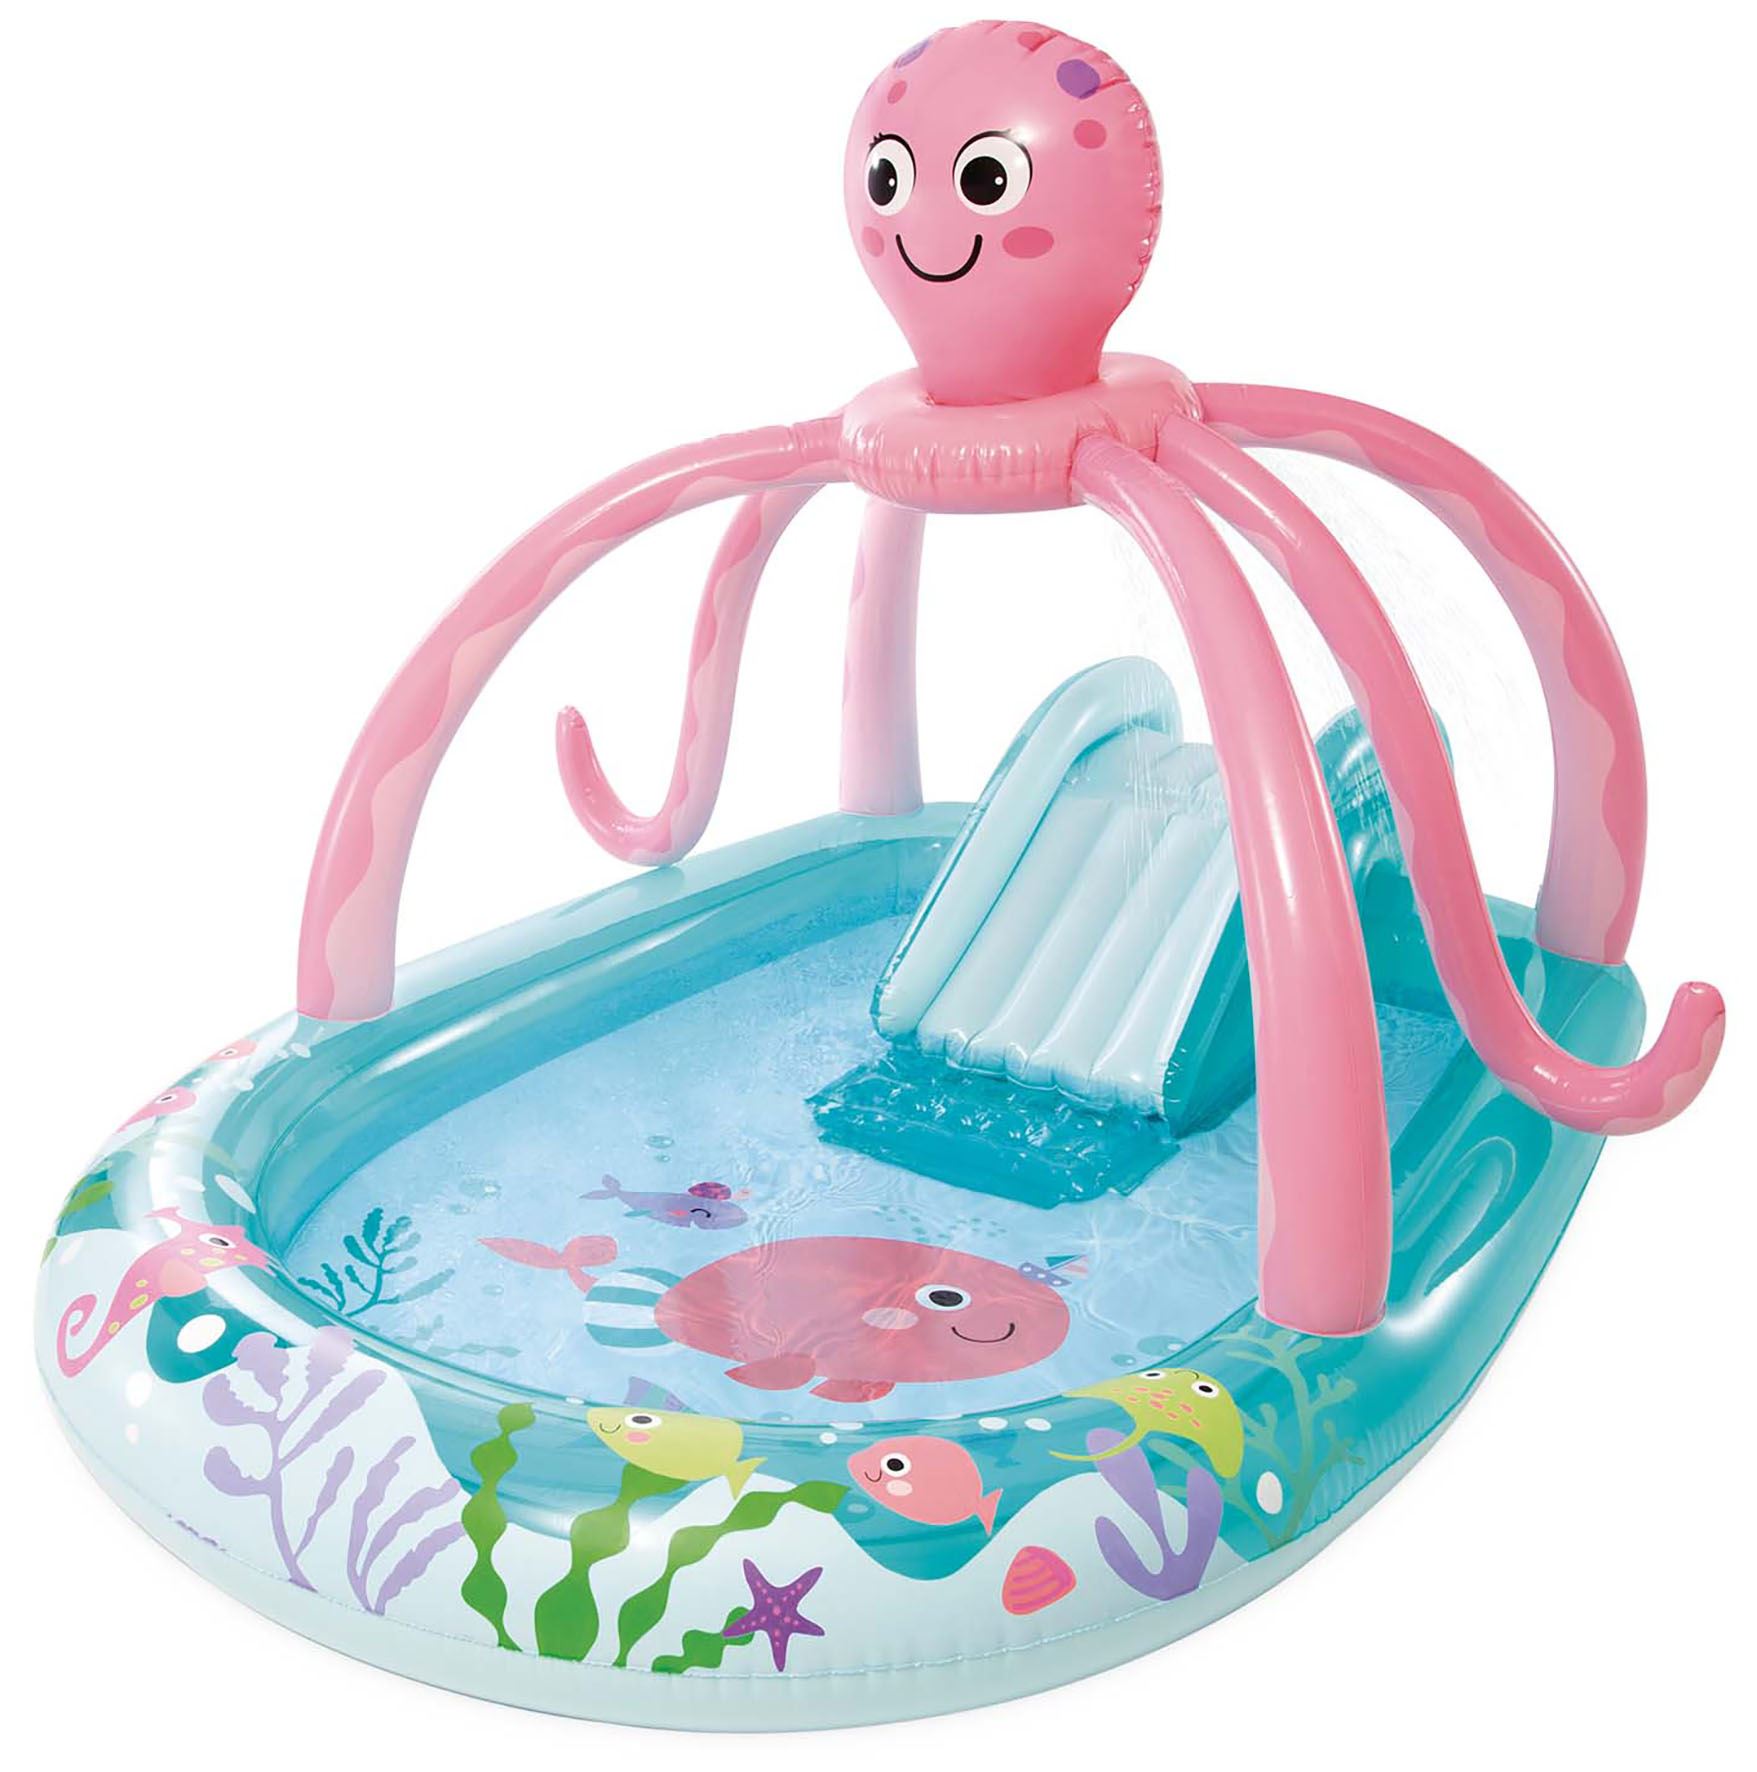 friendly-octopus-play-center-ages-2-